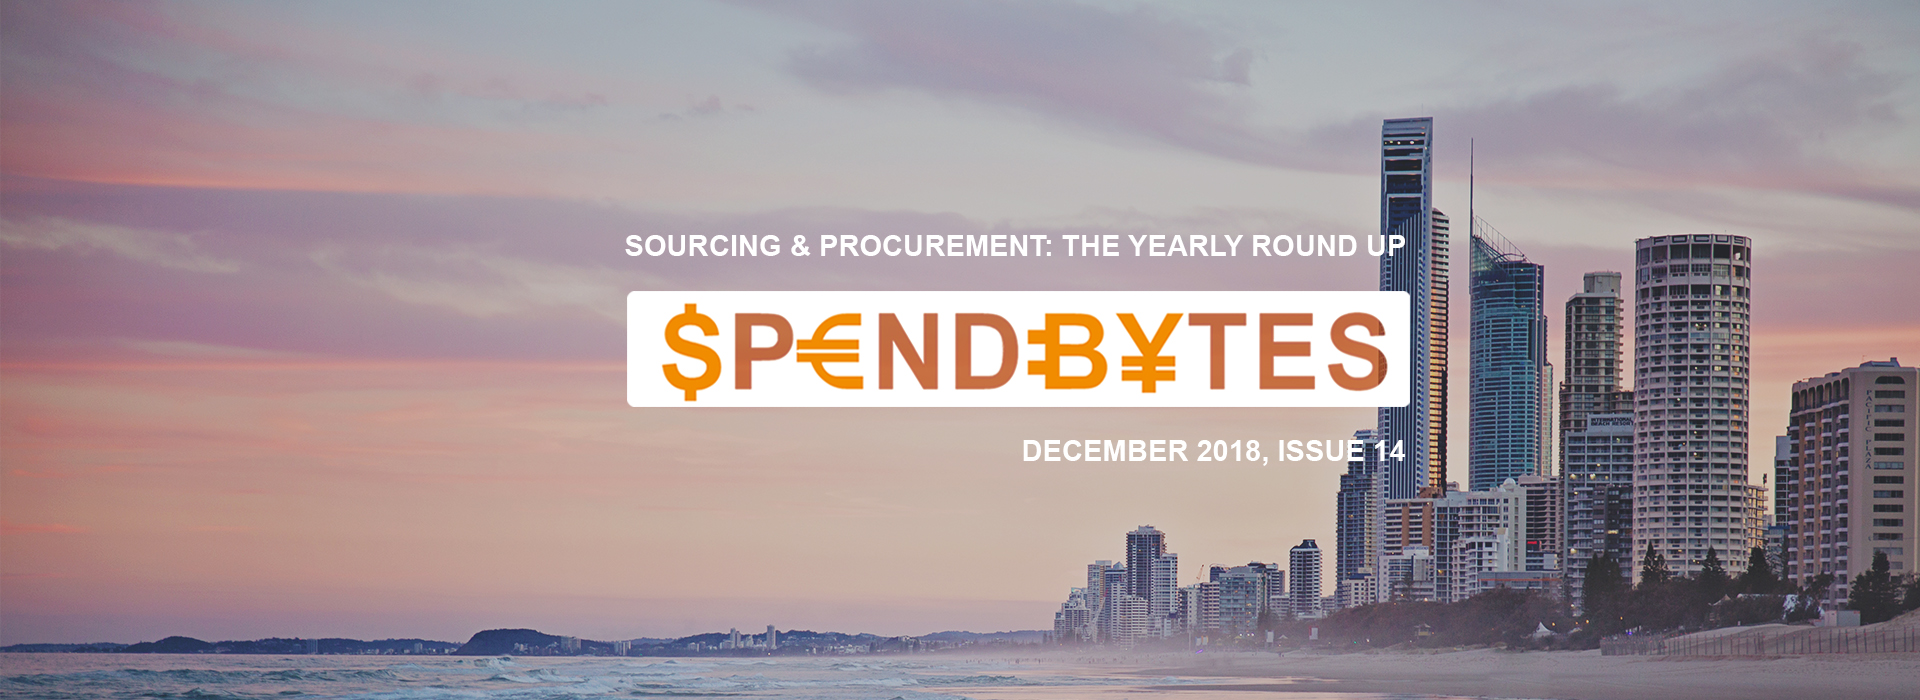 Sourcing and Procurement Trends 2018 -SpendBytes Issue 10